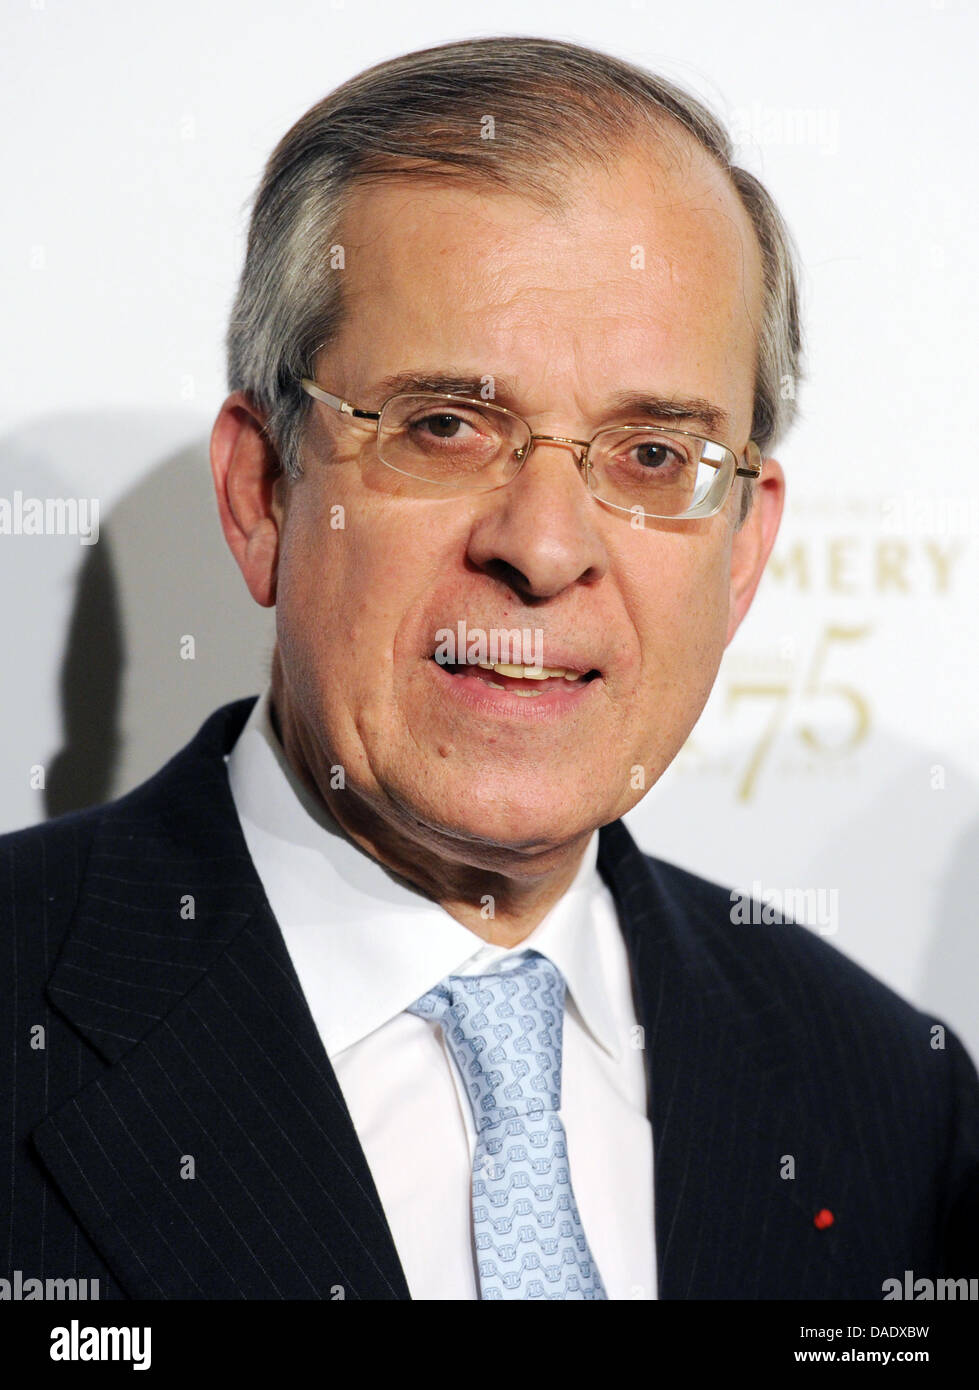 French ambassador Maurice Gourdault-Montagne attends the 175th anniversary of the champagne brand Pommery at the French embassy in Berlin, Germany, 03 November 2011. Photo: Jens Kalaene Stock Photo